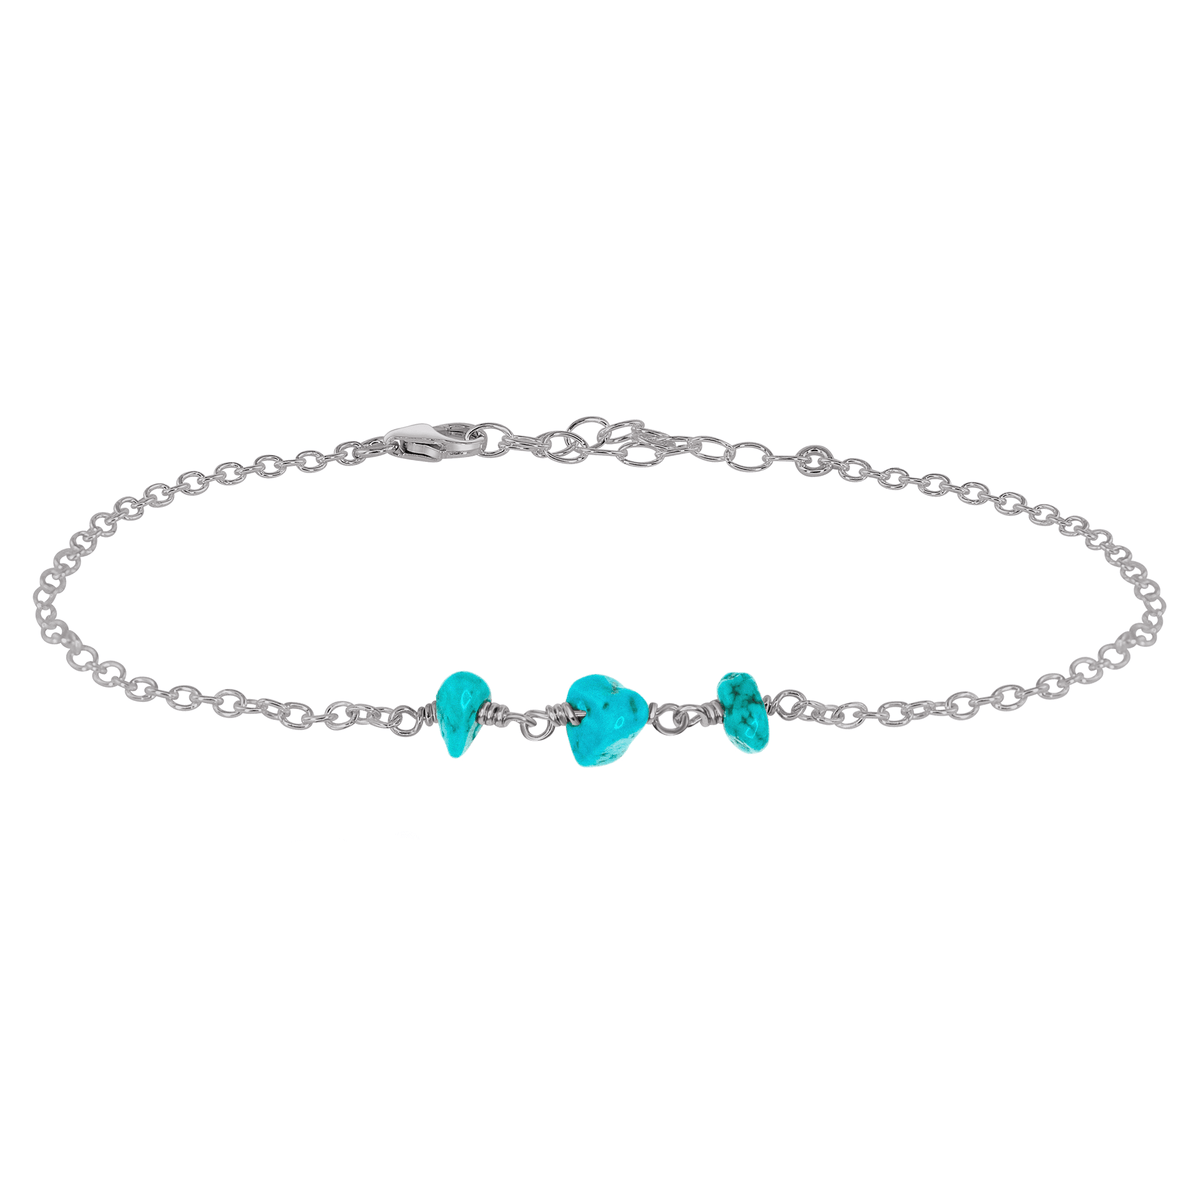 Beaded Chain Anklet - Turquoise - Stainless Steel - Luna Tide Handmade Jewellery